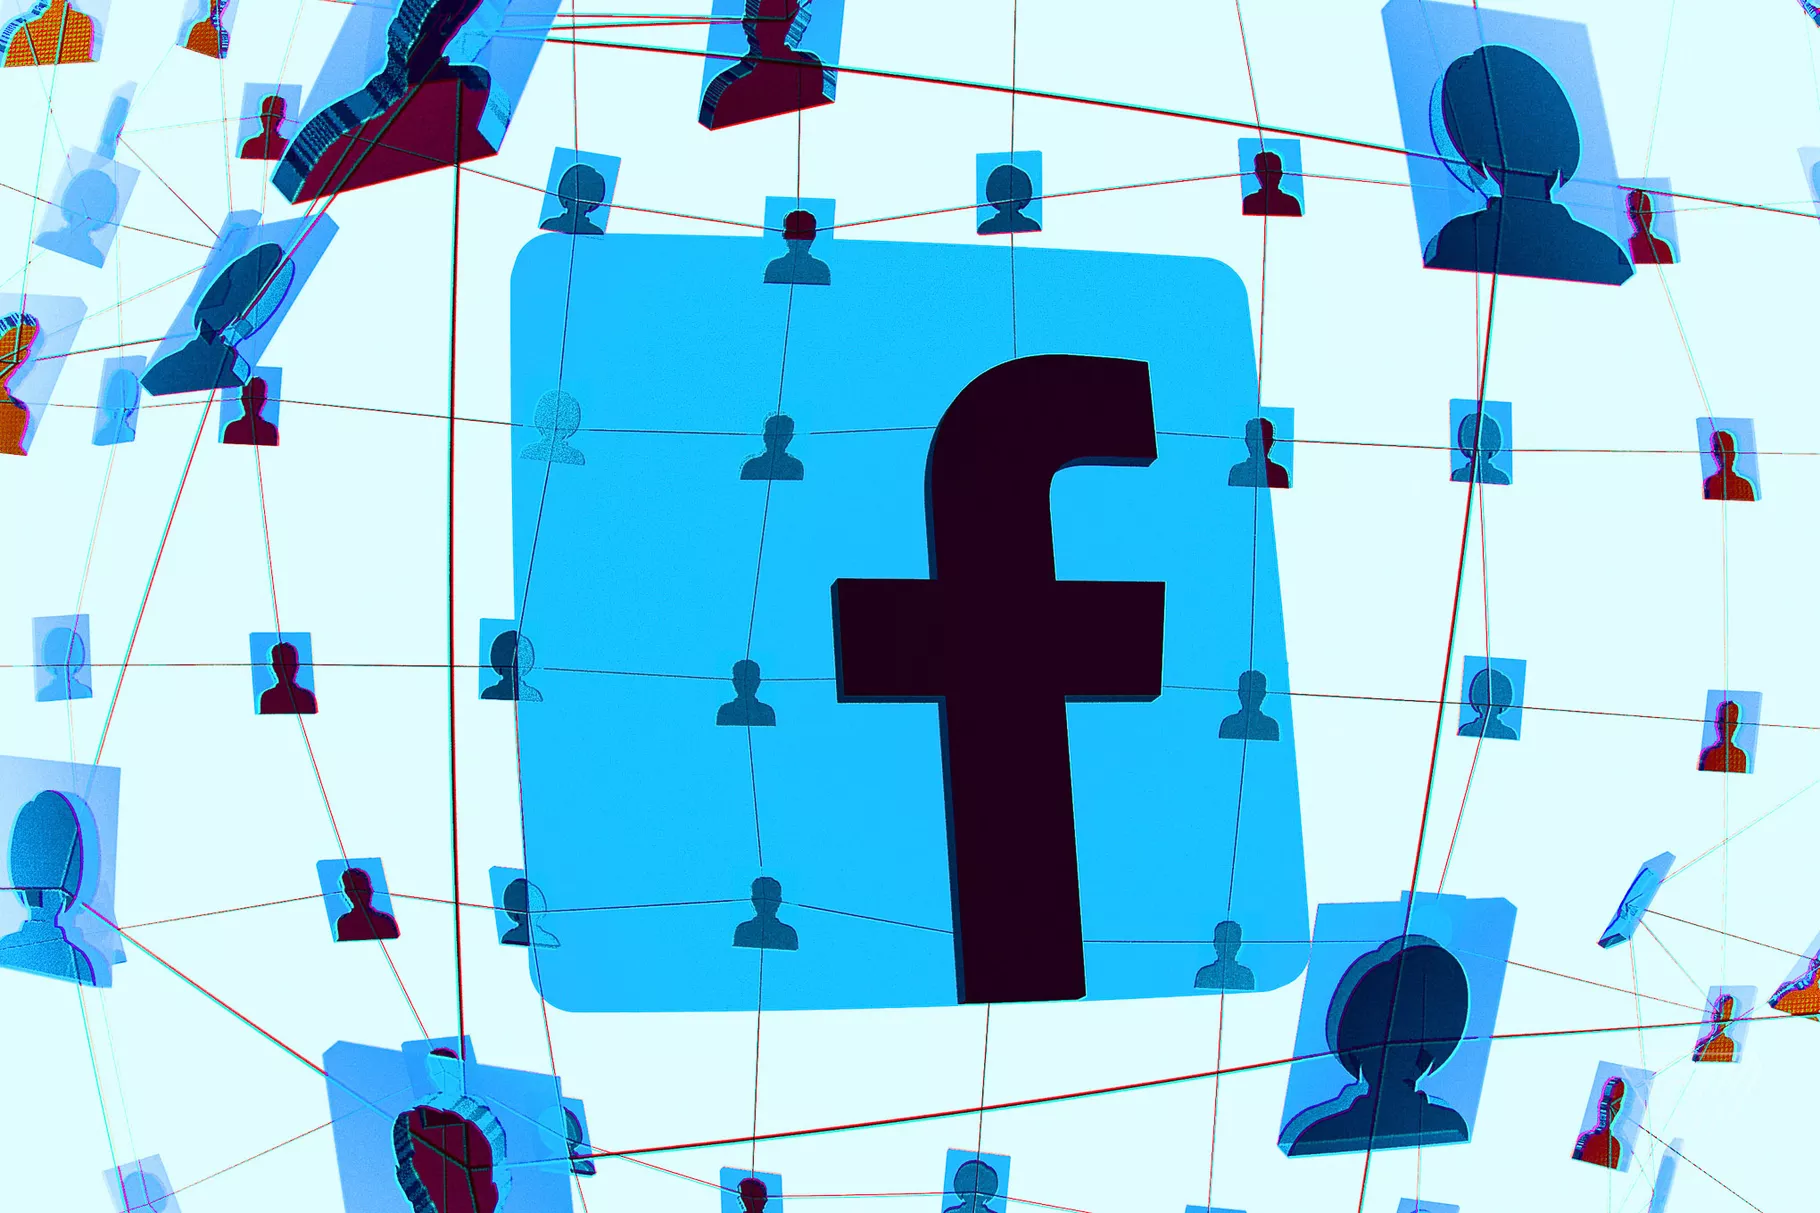 How to use Facebook while giving it the minimum amount of personal data